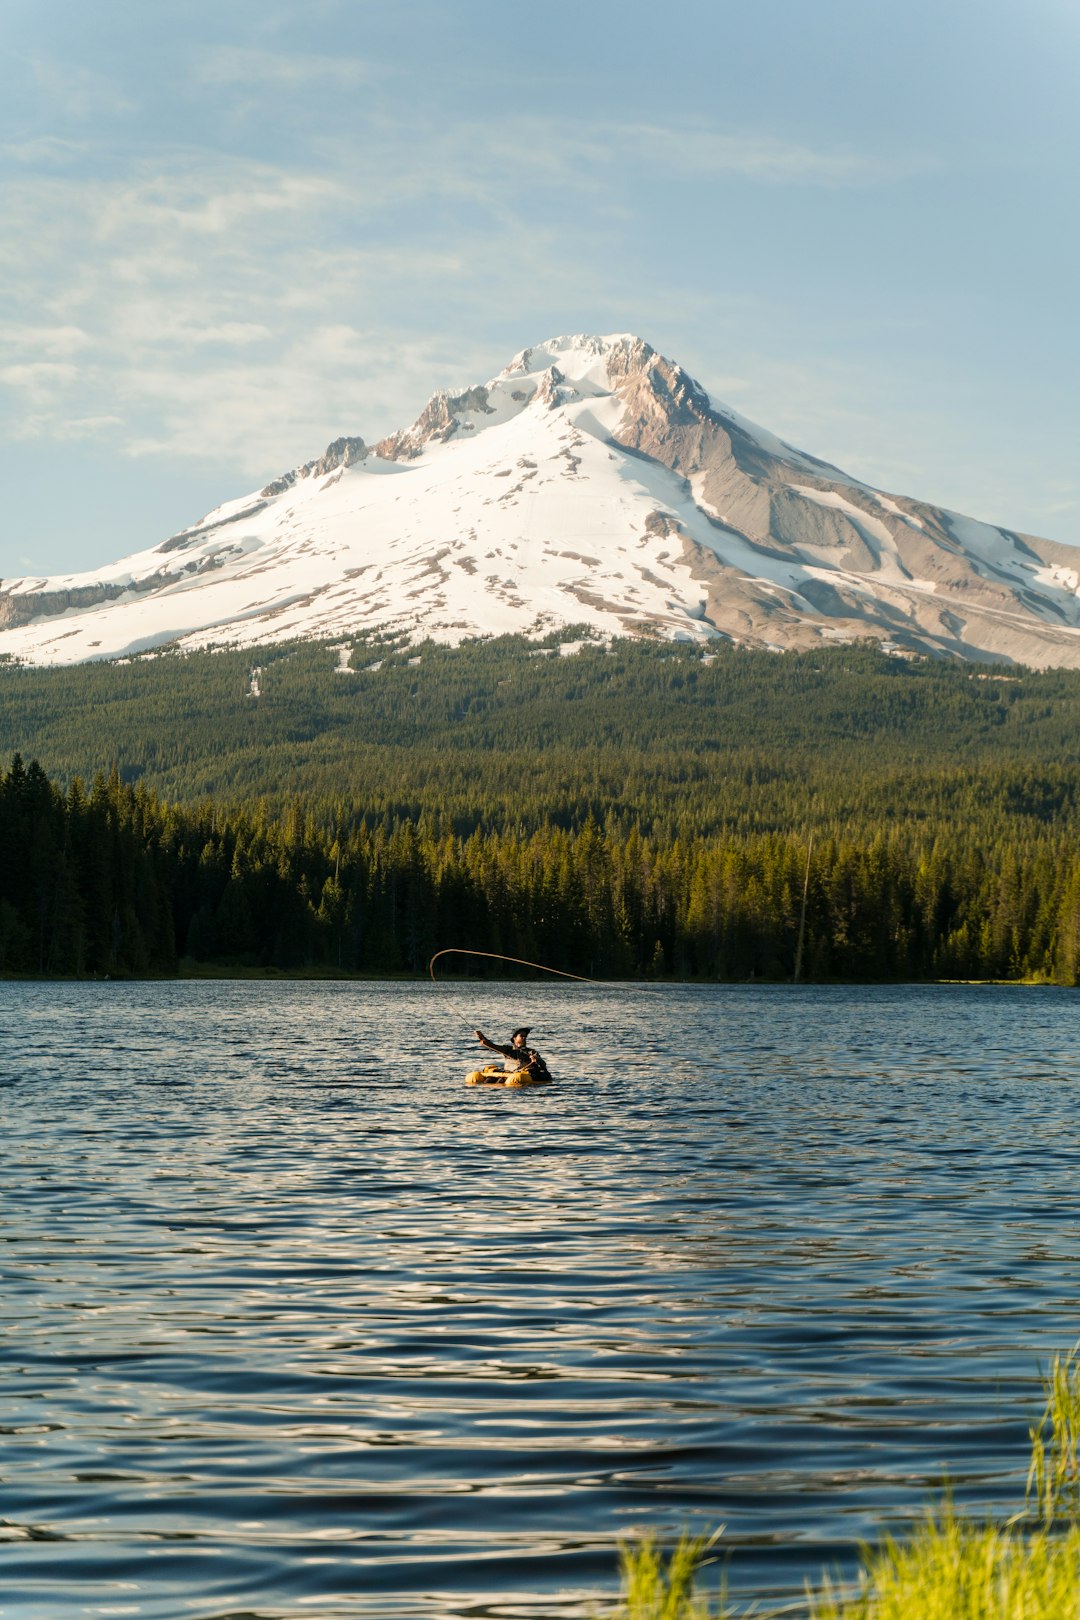 person riding on boat on lake near snow covered mountain during daytime